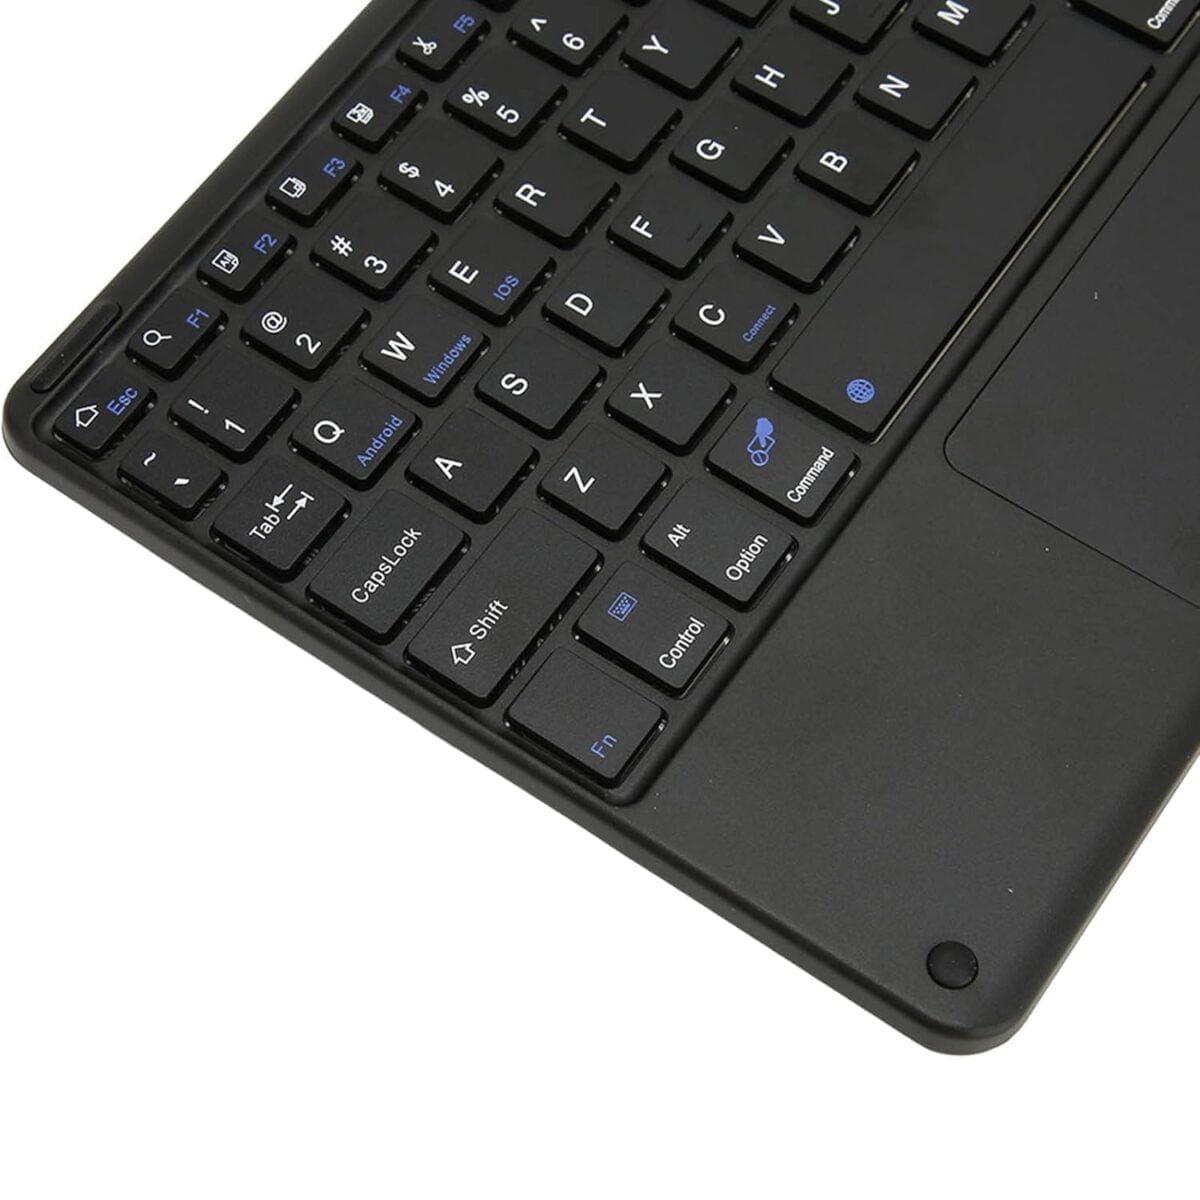 Helonics rechargeable bluetooth 5. 0 keyboard with touchpad 6 helonics rechargeable bluetooth 5. 0 keyboard with touchpad